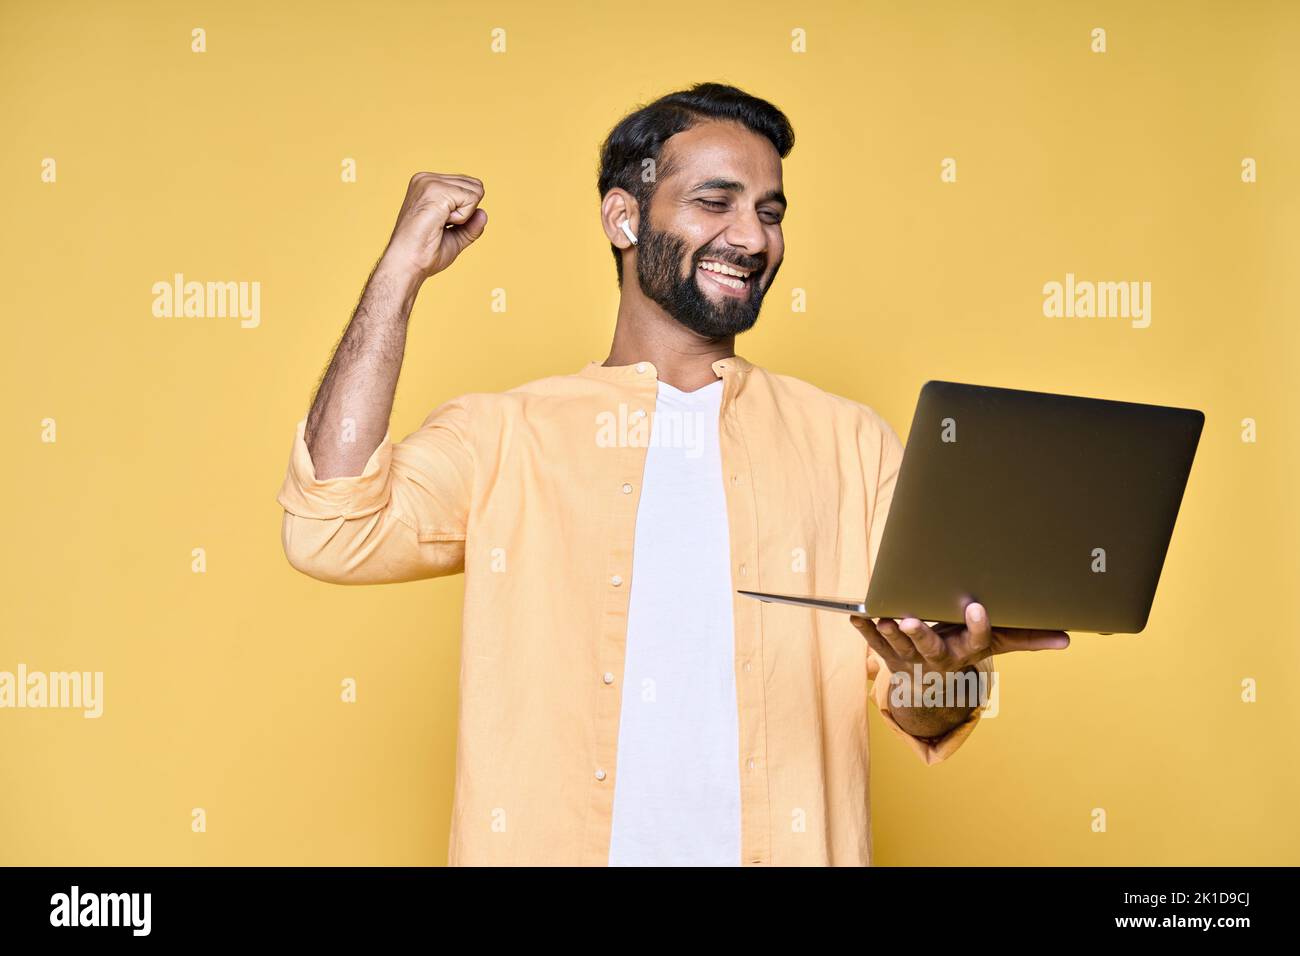 Happy indian man raising fist watching game on laptop isolated on yellow. Stock Photo